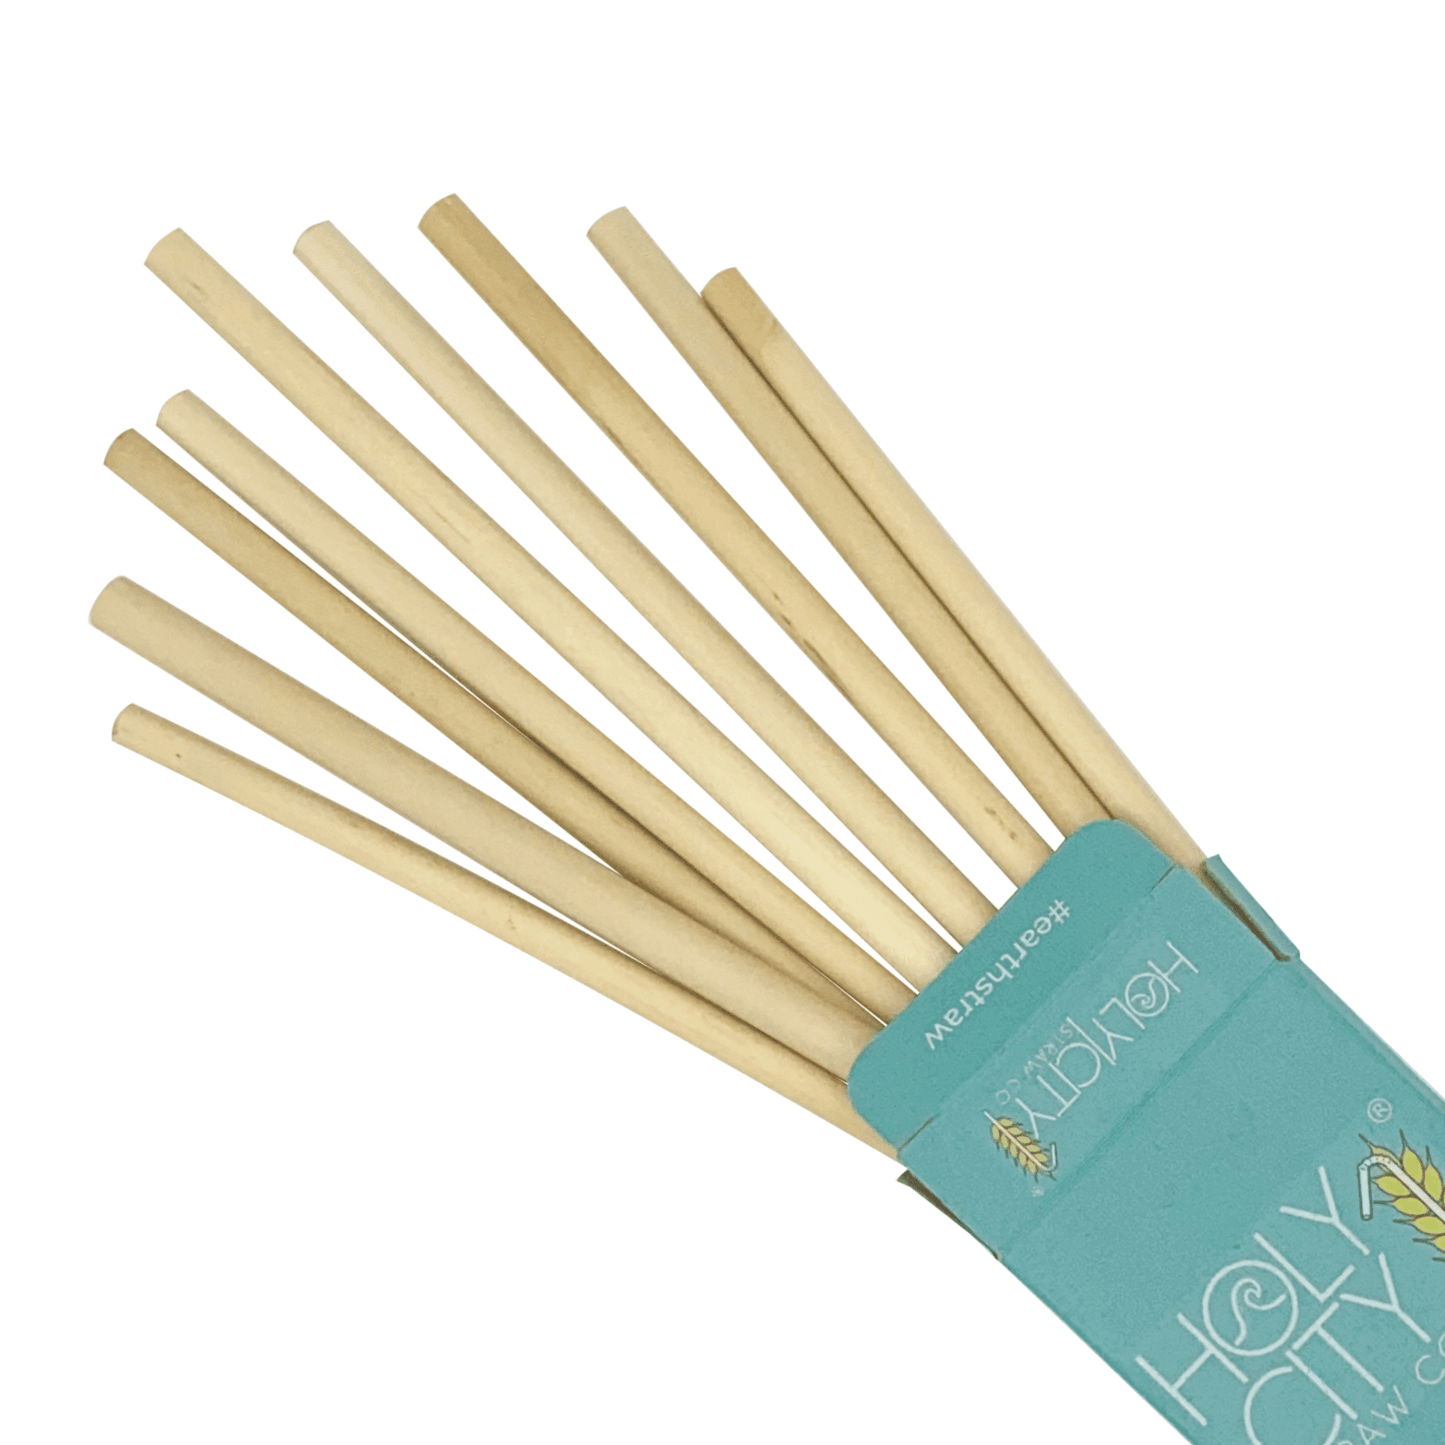 Tall Reusable Reed Straws - 10 Pack by Holy City Straw Company